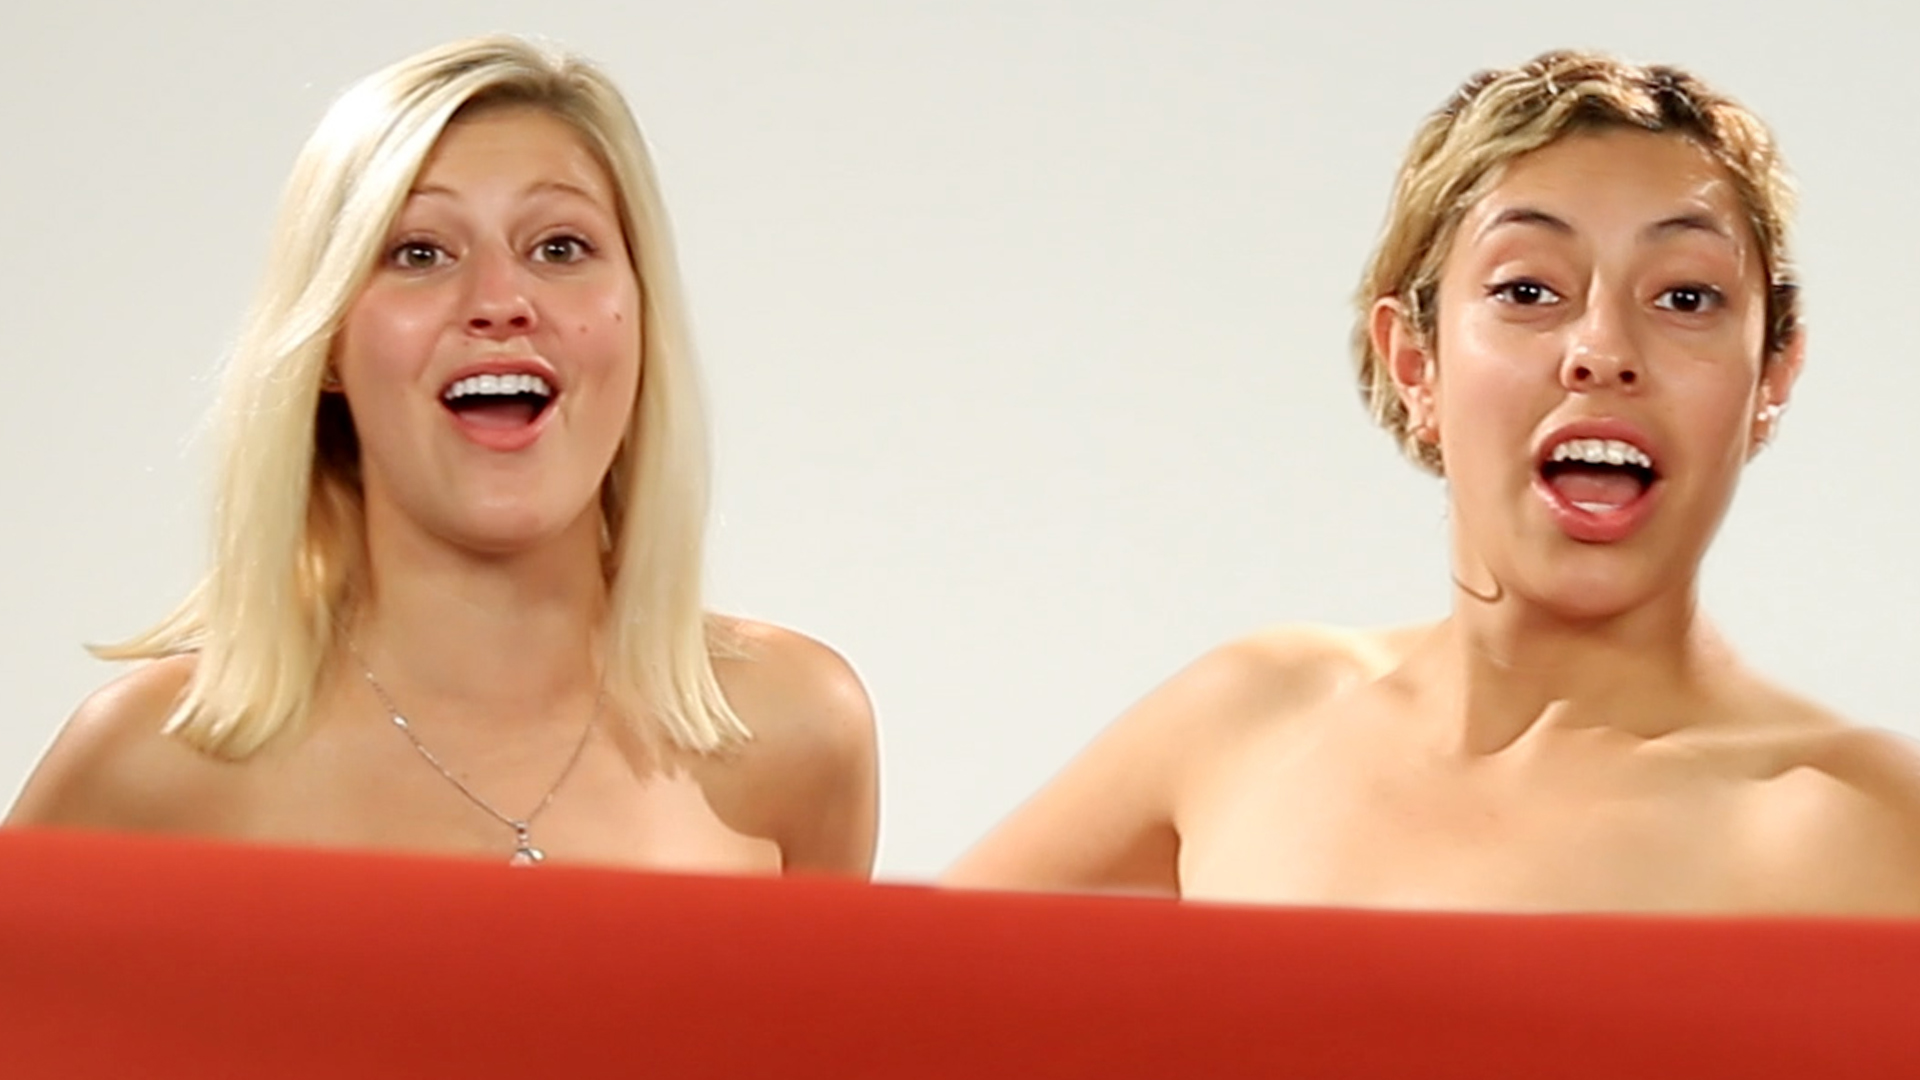 Best friends see each other naked for the first time